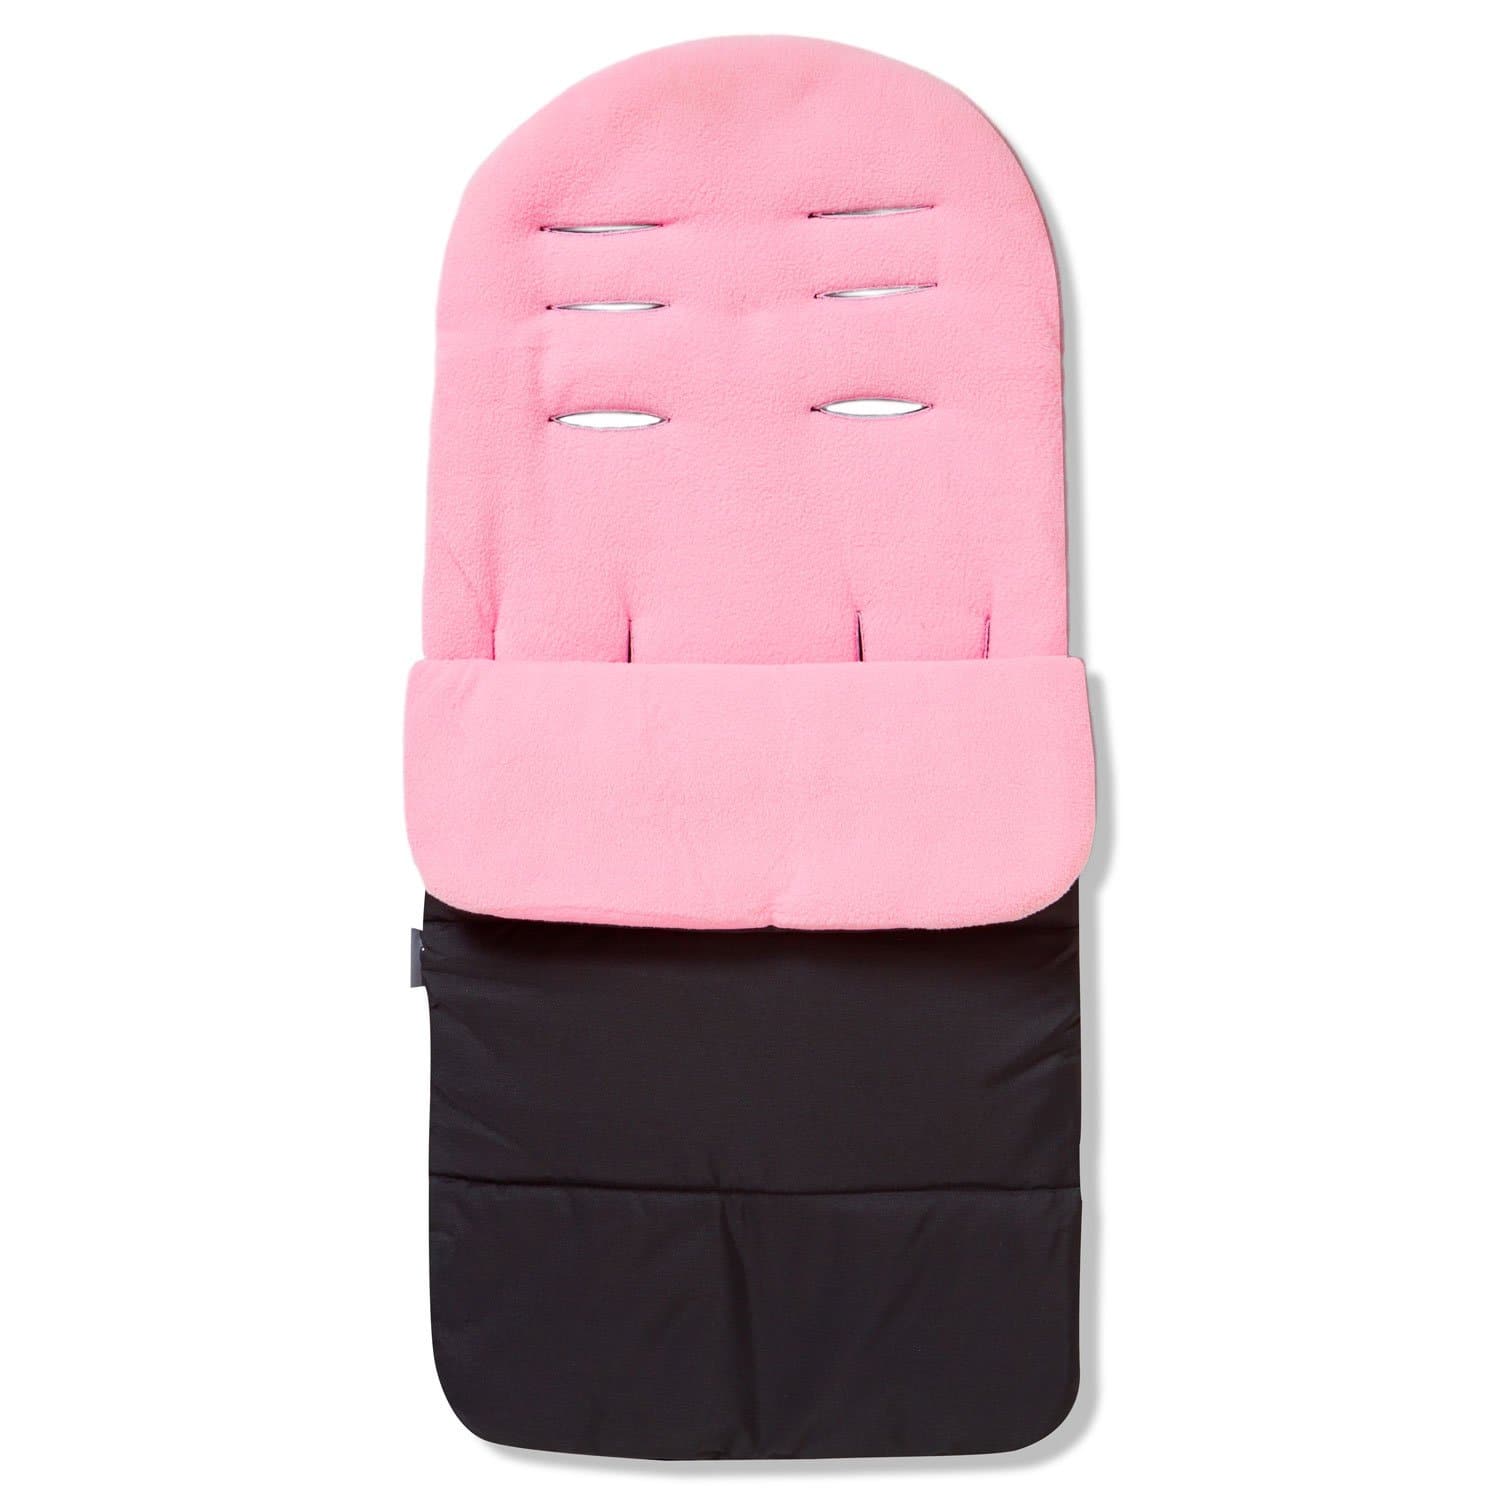 Universal Premium Pushchair Footmuff / Cosy Toes - Fits All Pushchairs / Prams And Buggies - Candy Pink / Fits All Models | For Your Little One